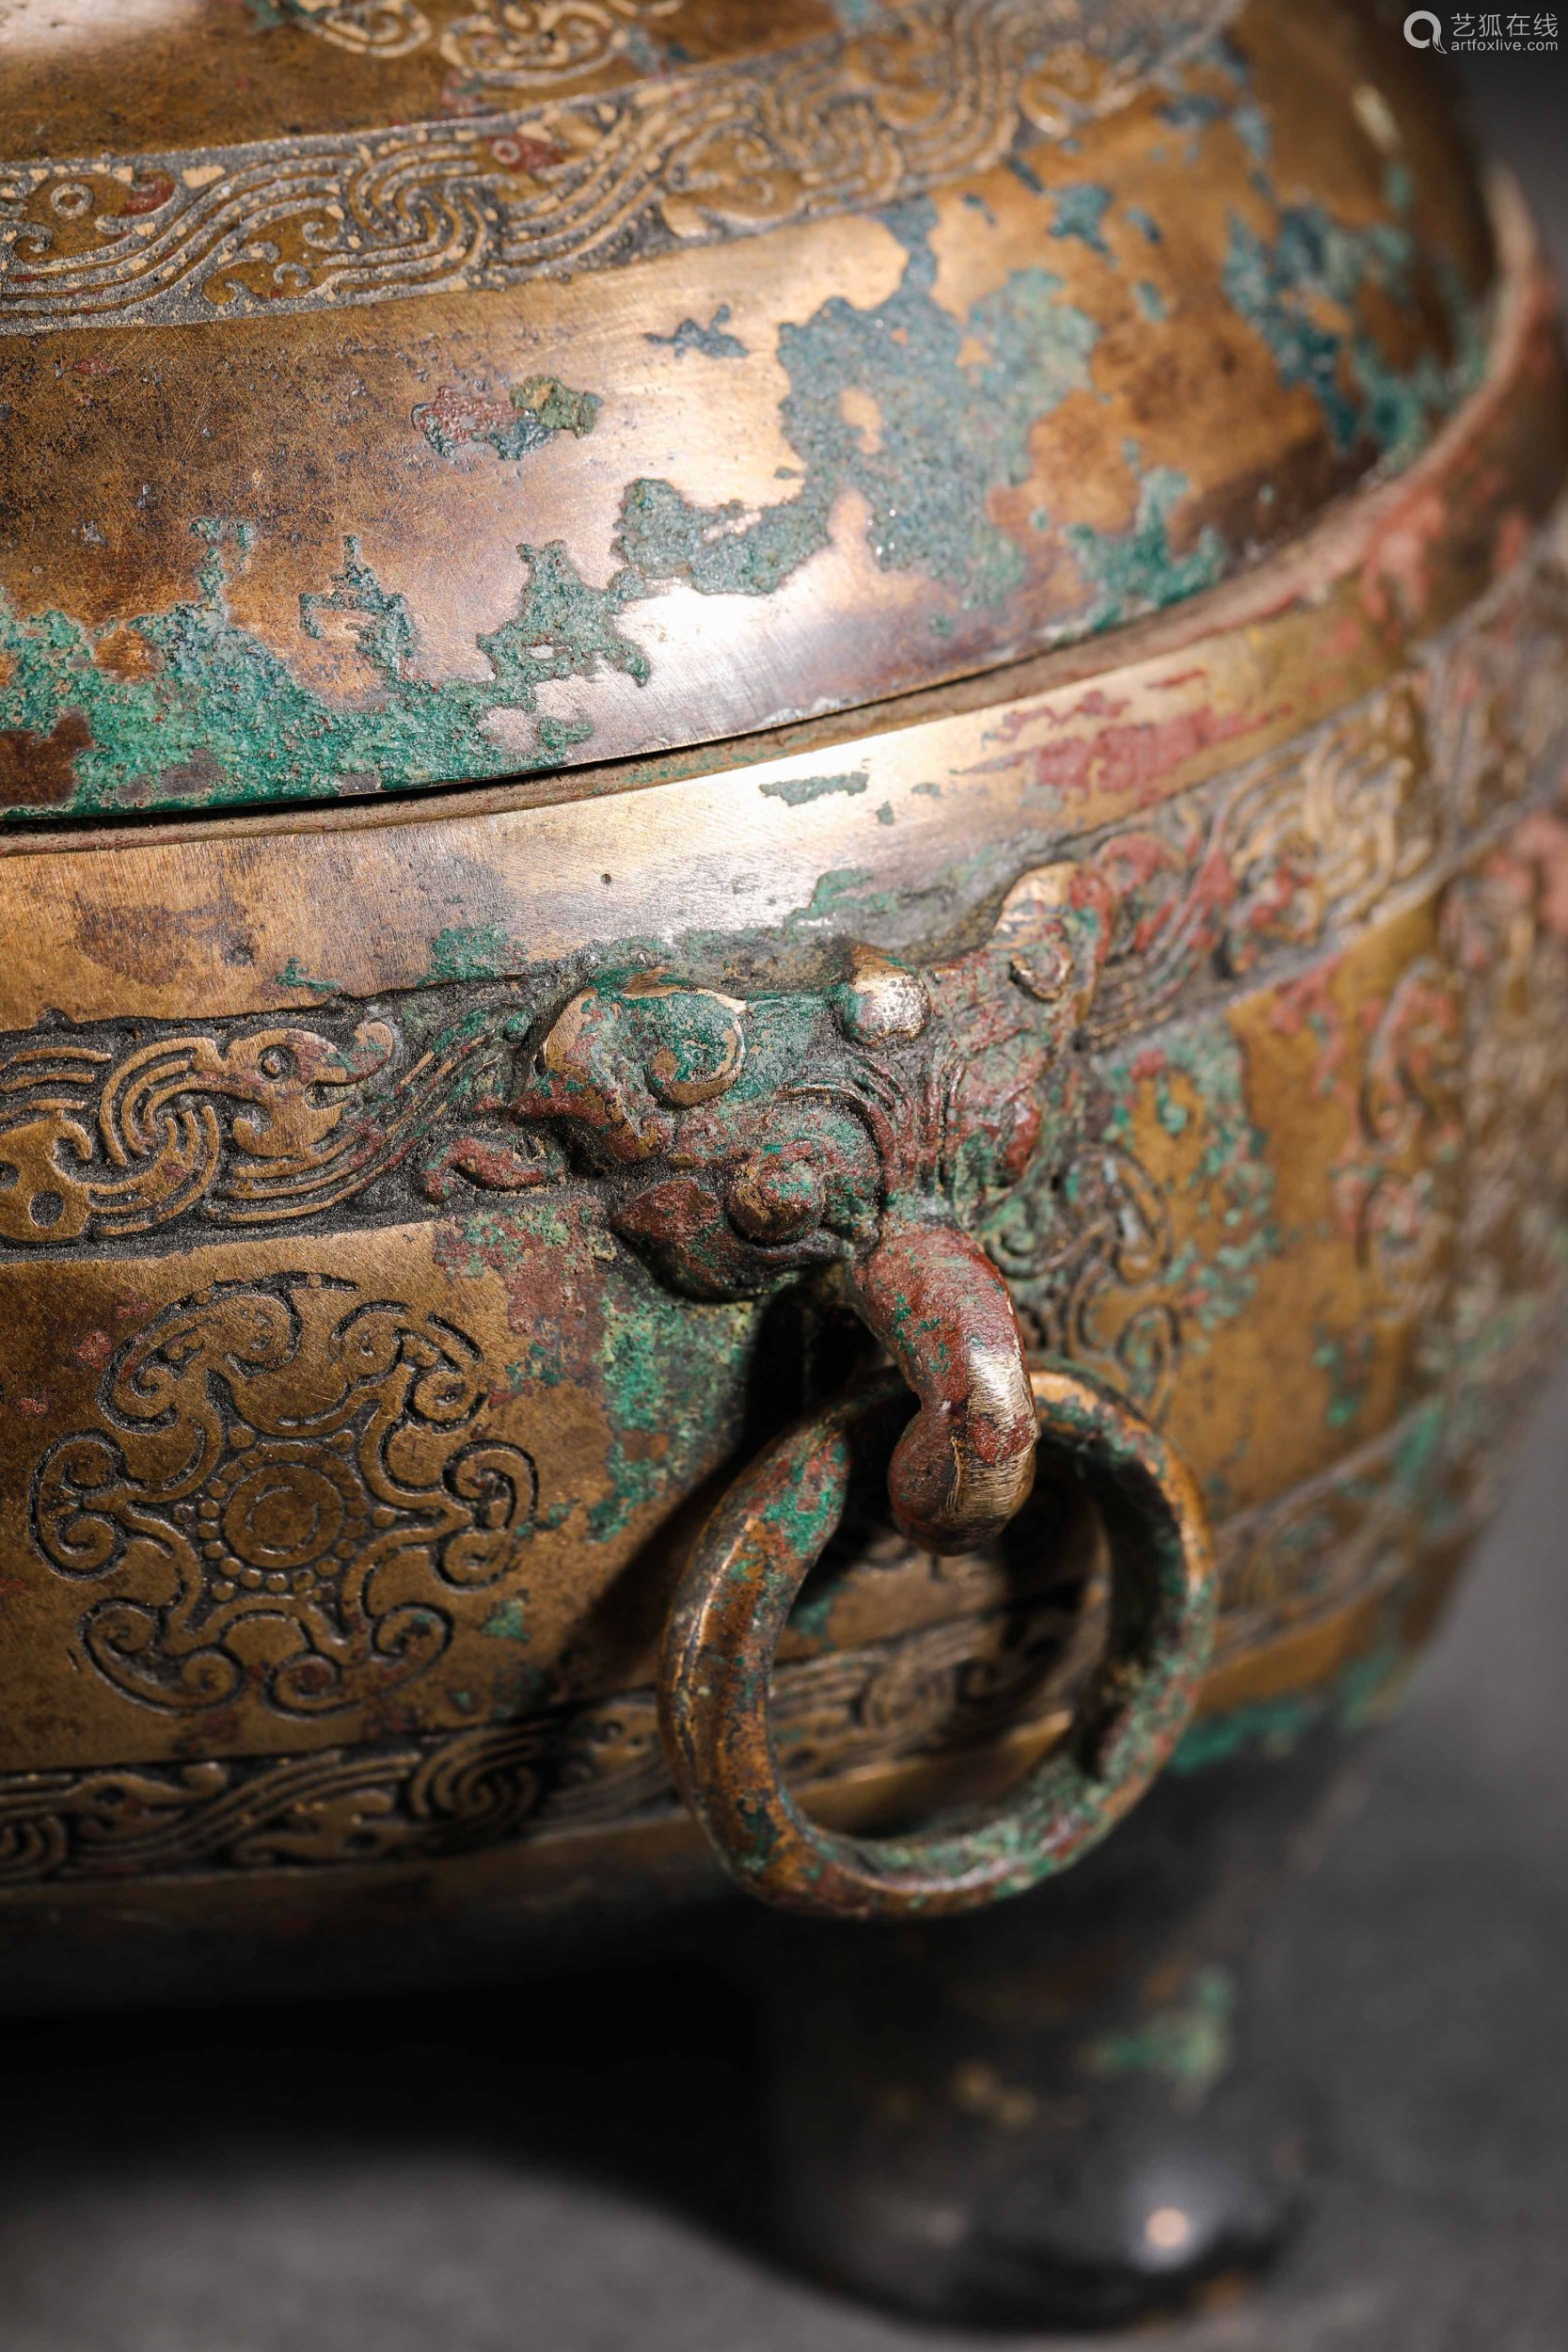 Han Dynasty Bronze Ding with Animal Patterns